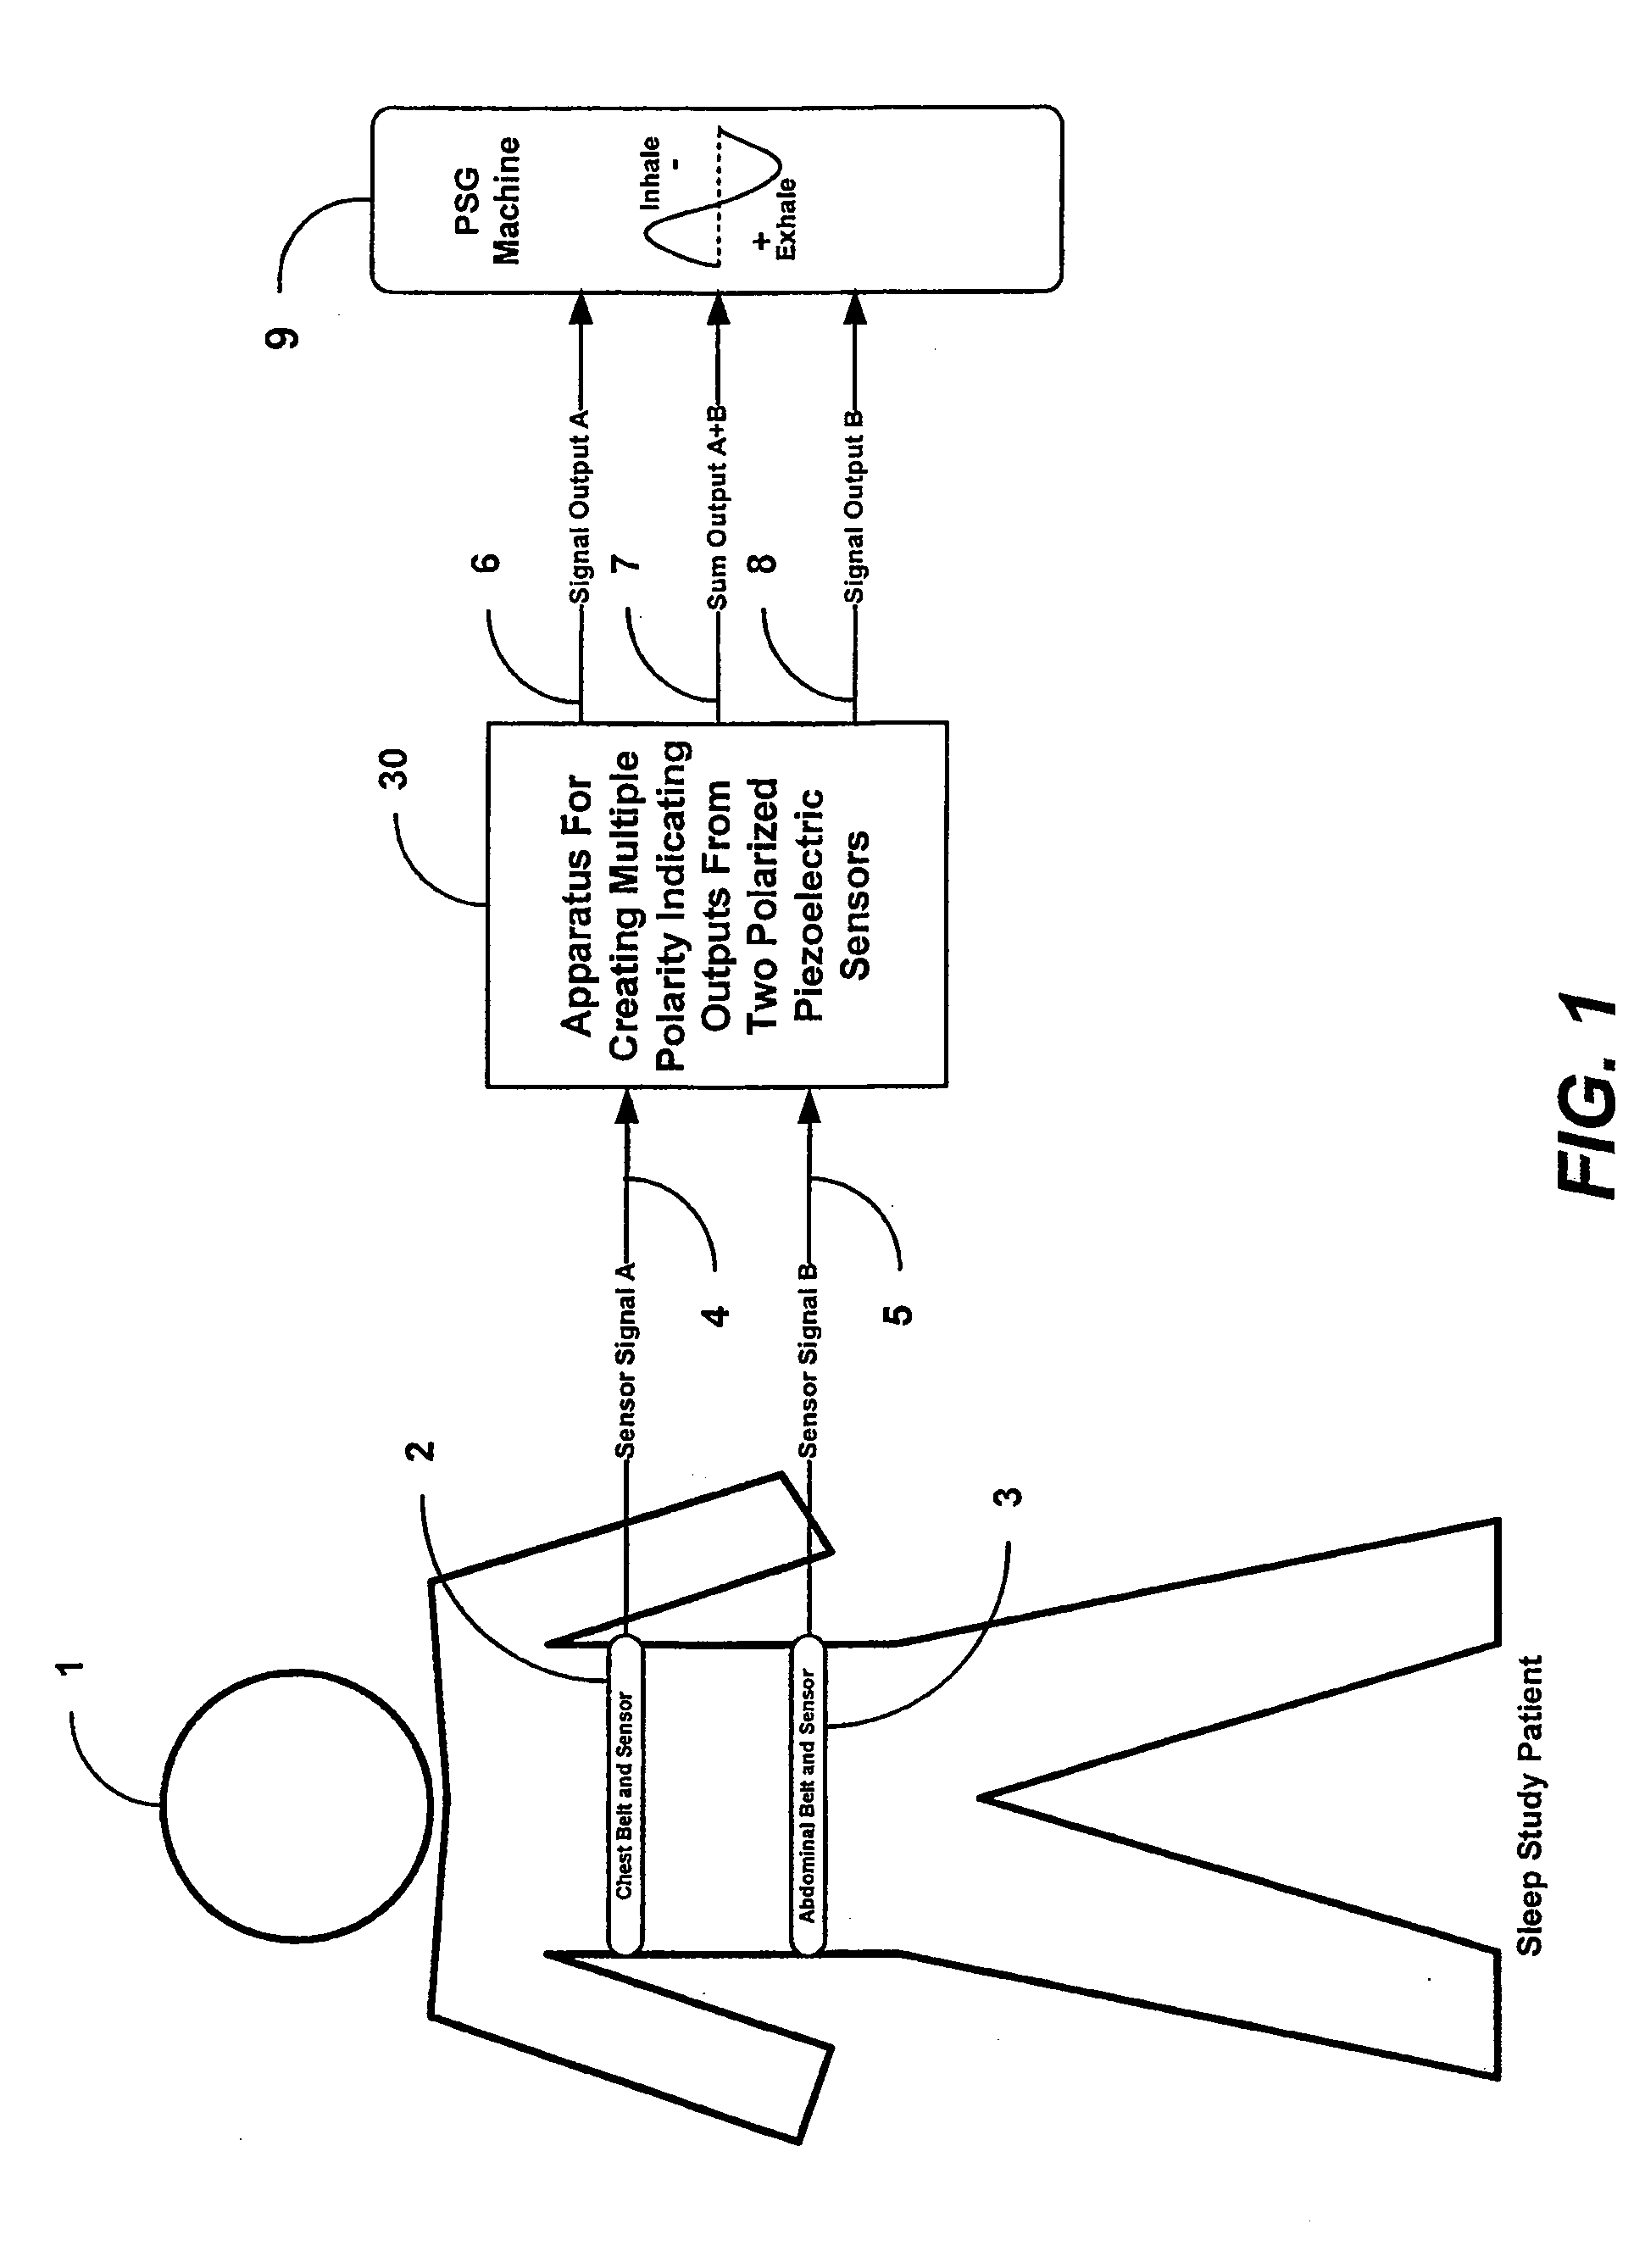 Apparatus and method for creating multiple polarity indicating outputs from two polarized piezoelectric film sensors